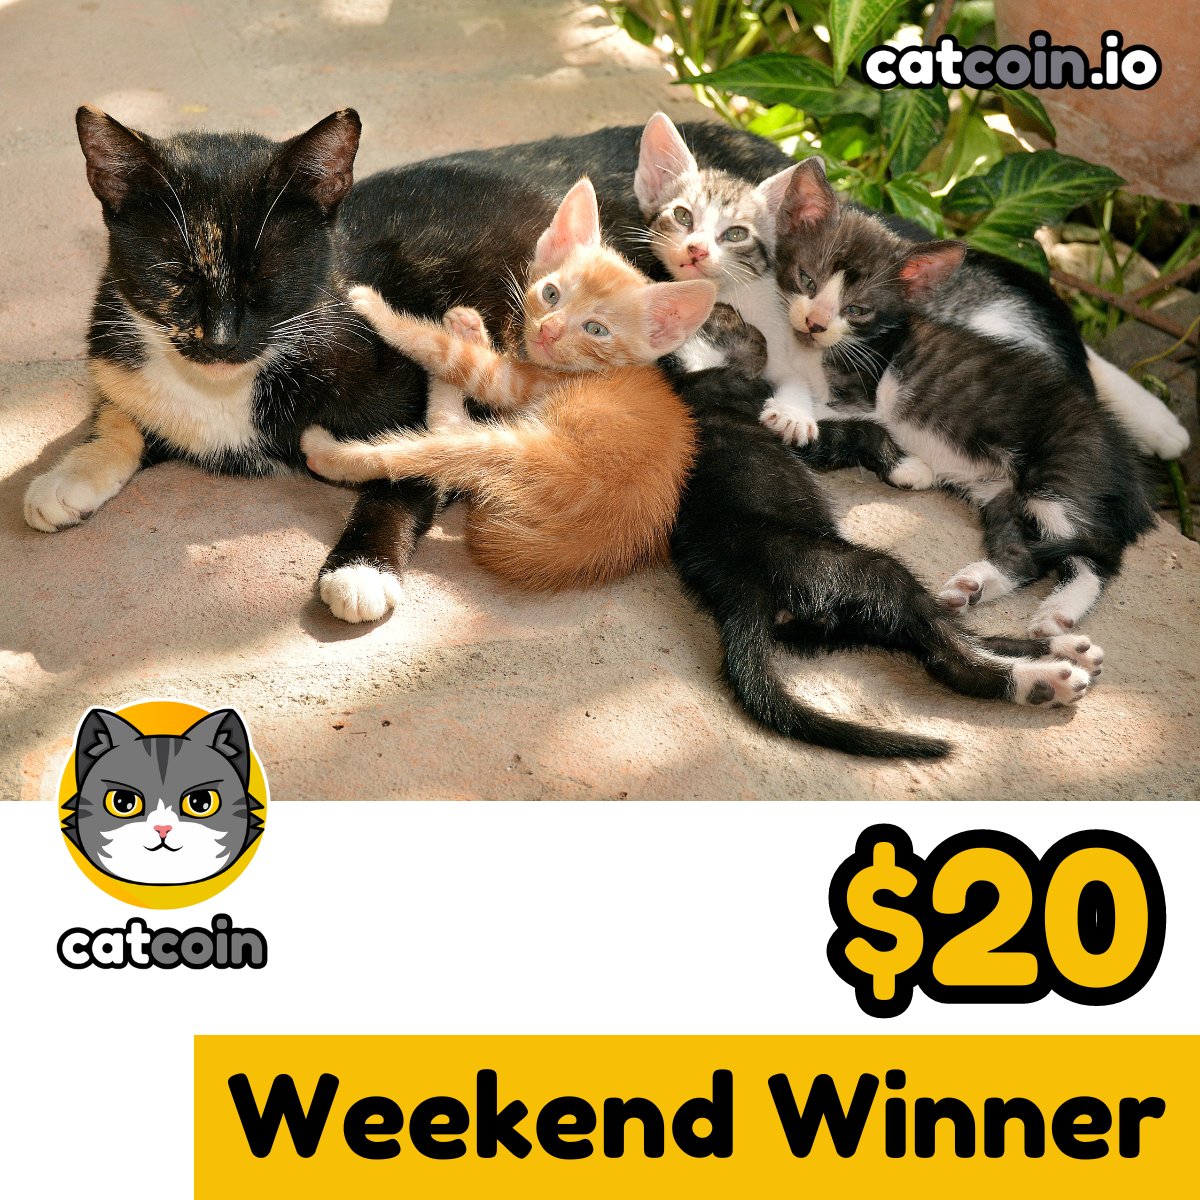 Another weekend = Another Weekend Winner ($20) • Follow @officialcatcoin • Retweet • And comment #Catcoin #USDT #giveaway 48 hours